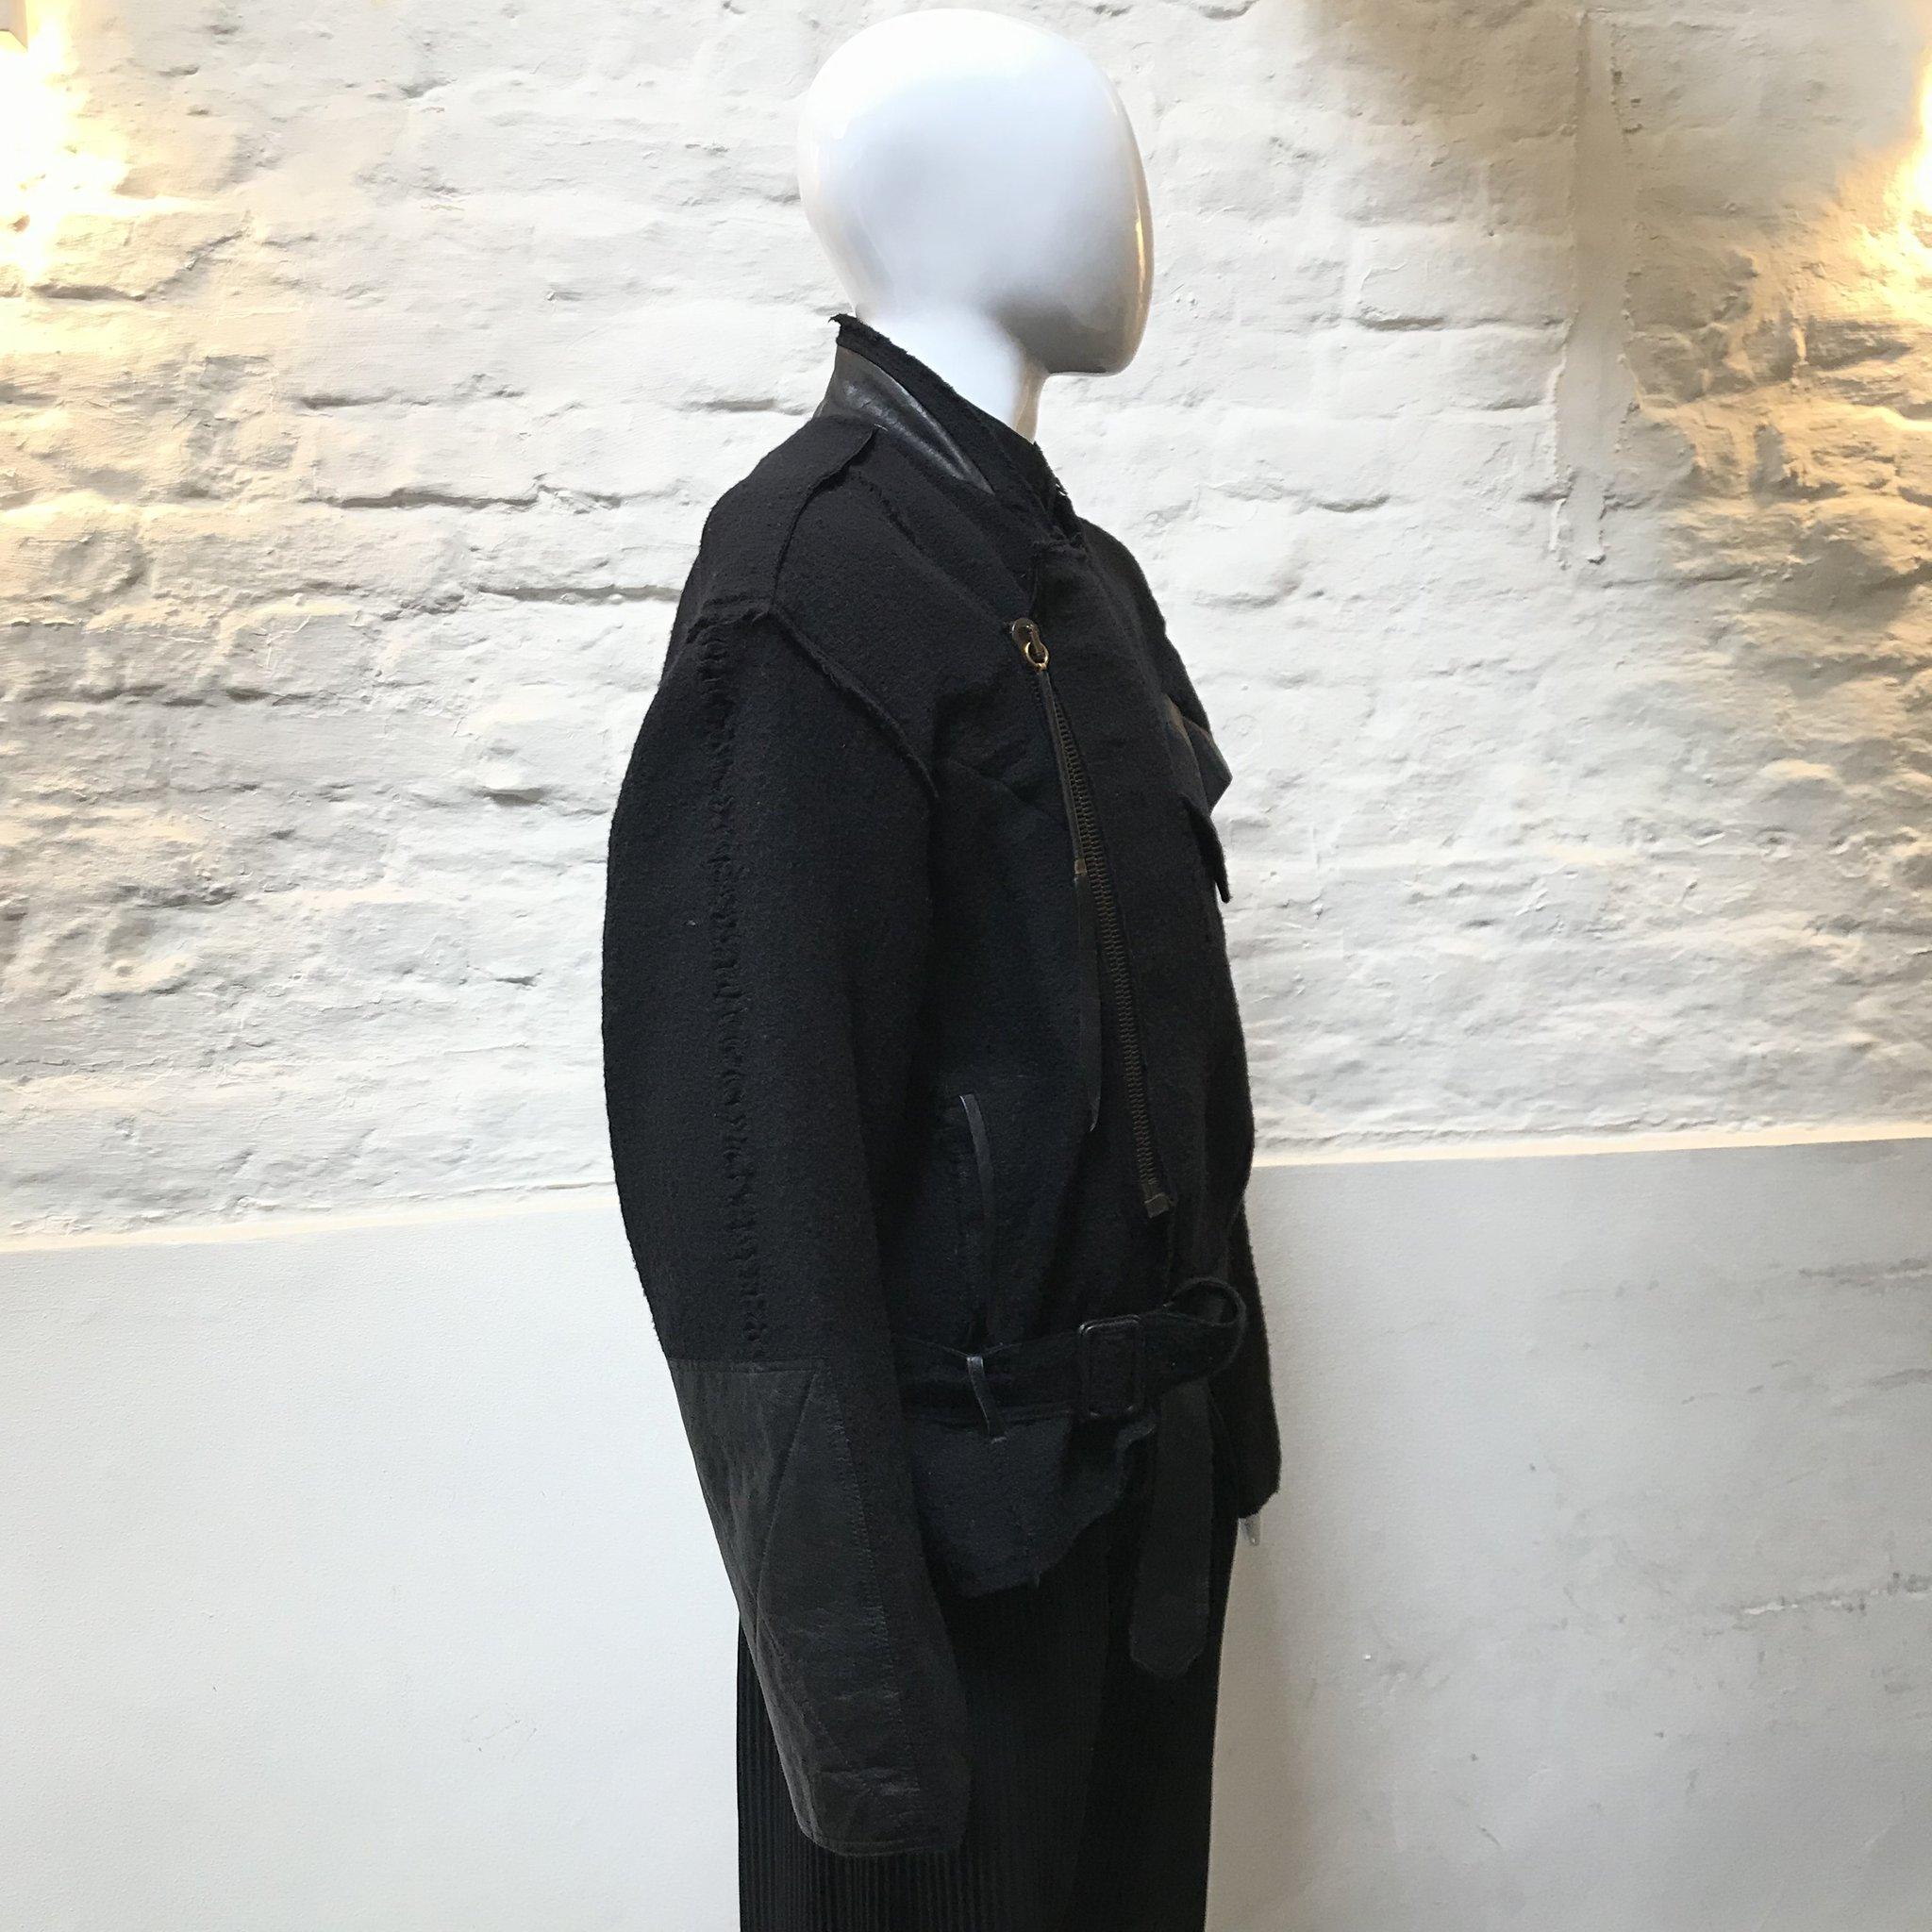 black uniform trimmed with gray astrakhan